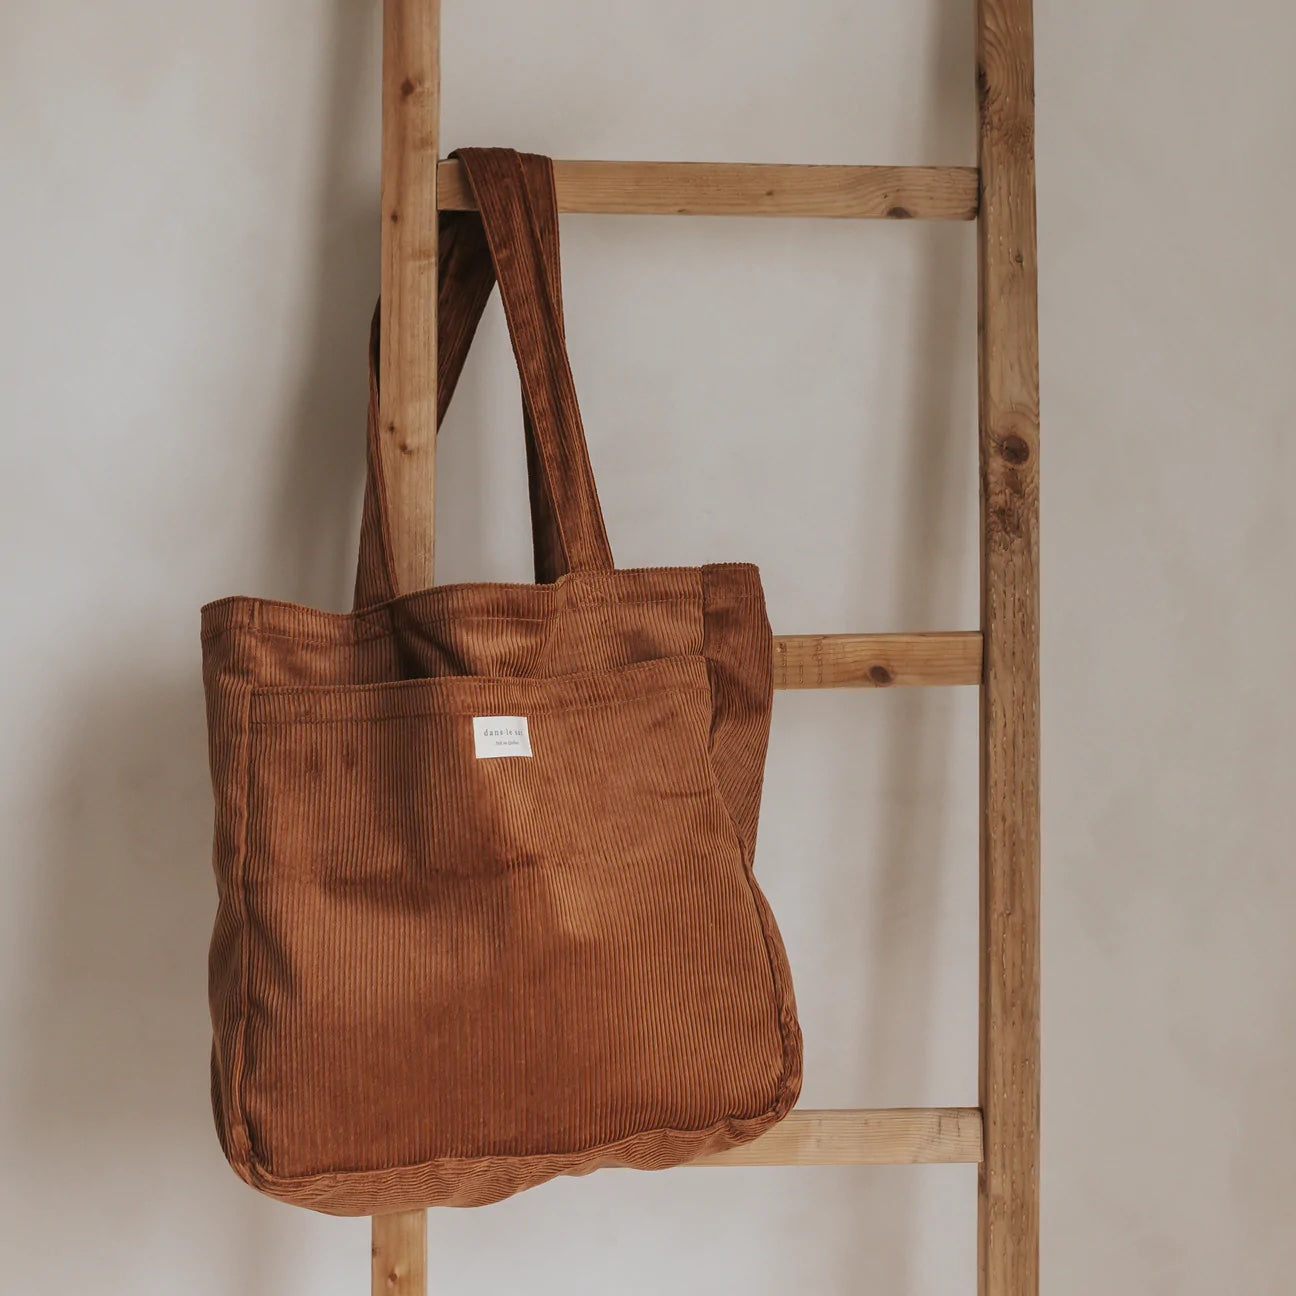 A brown Dans Le Sac tote hanging from a wooden ladder.